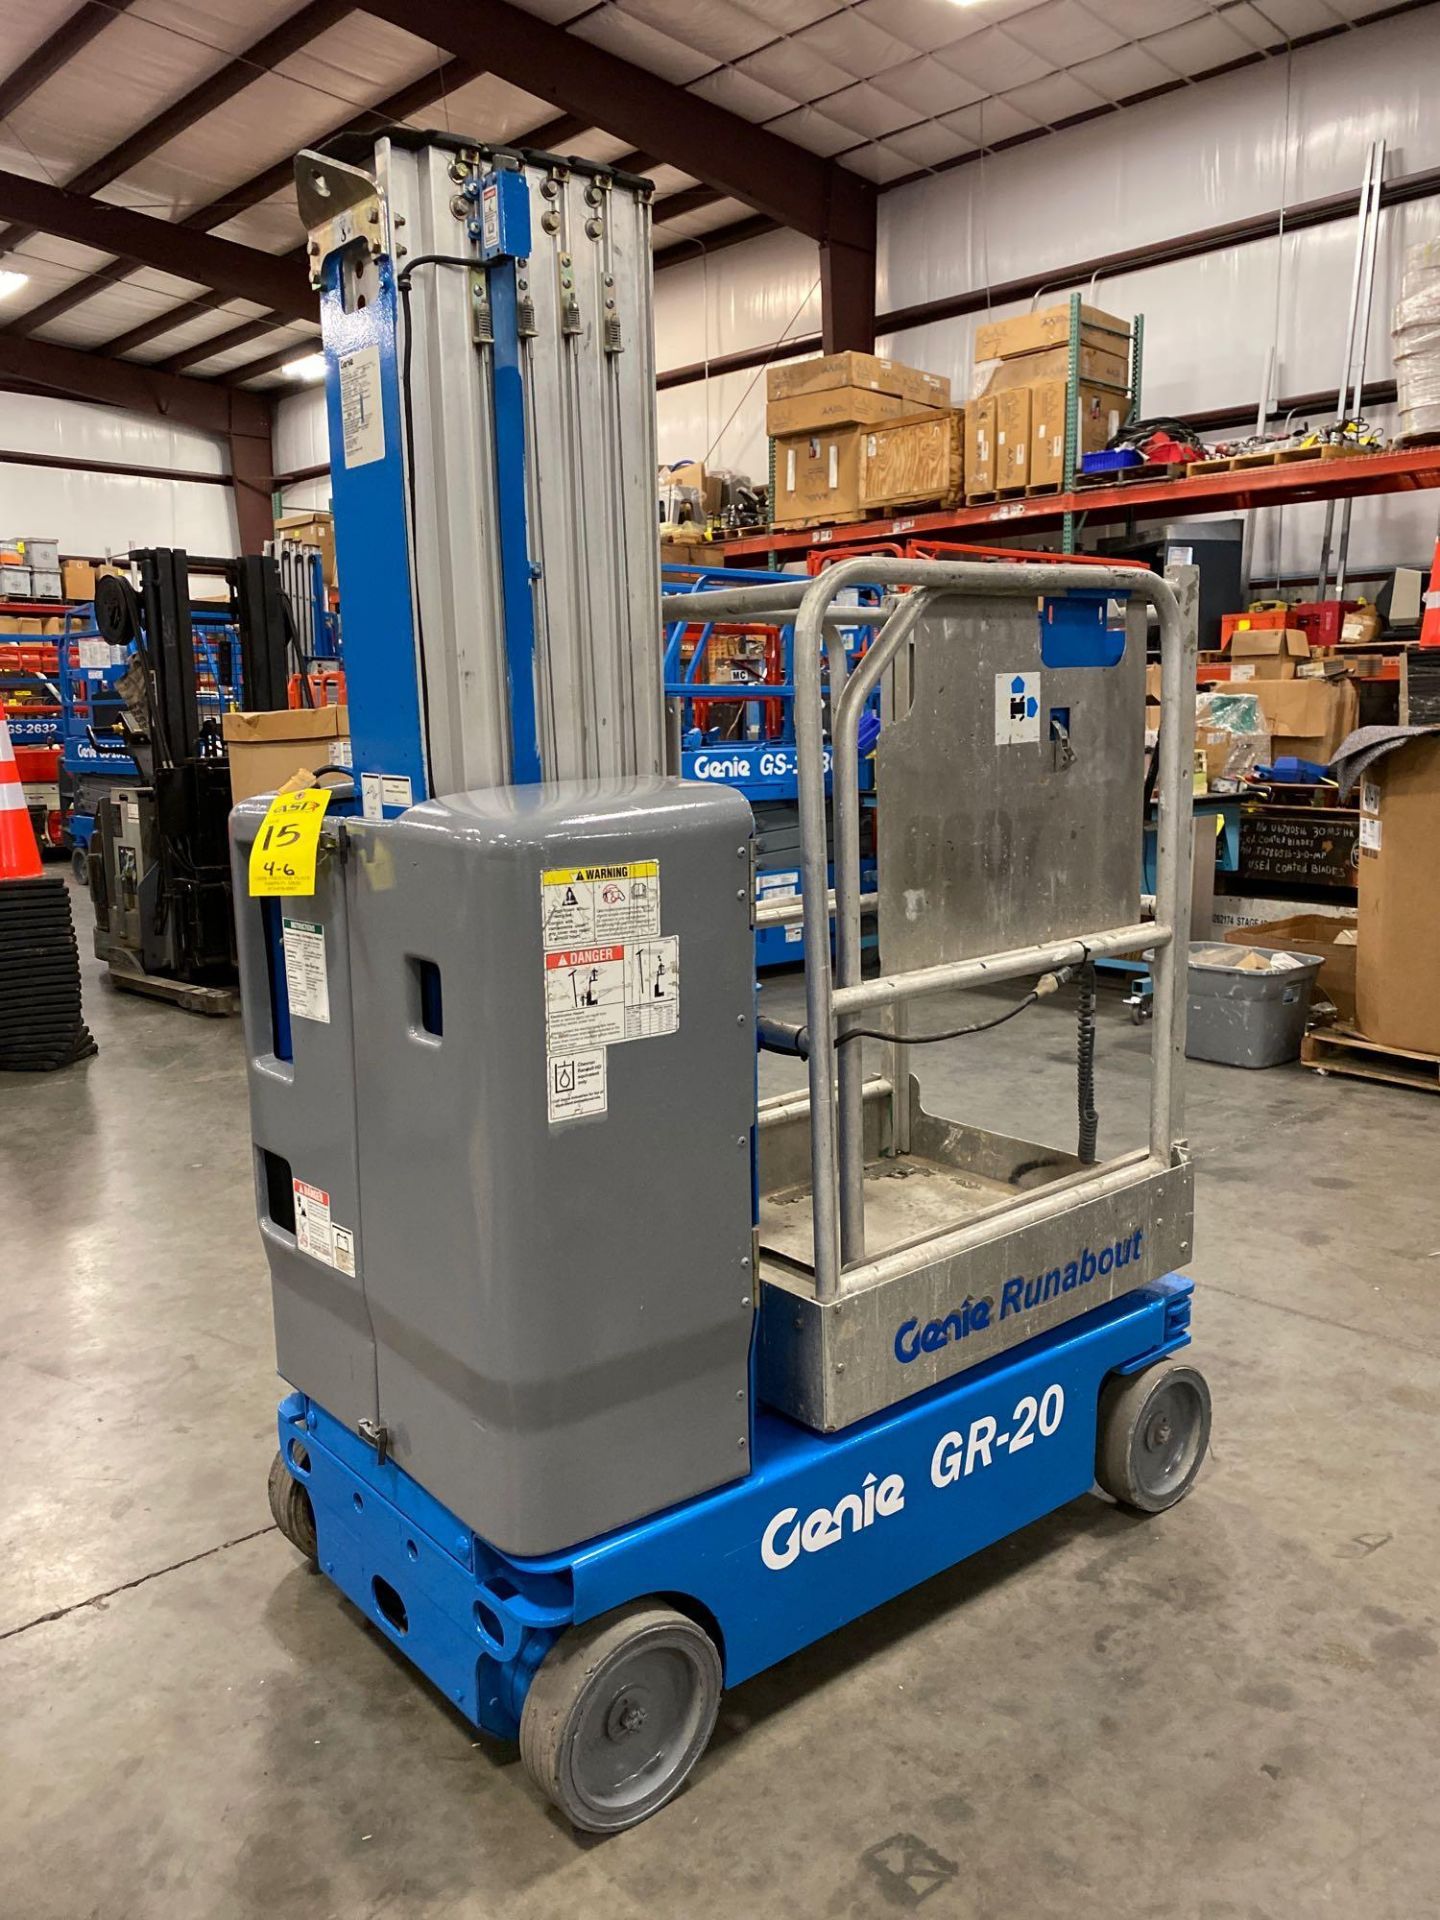 2014 GENIE GR-20 ELECTRIC MAN LIFT, 20' PLATFORM HEIGHT, SELF PROPELLED, BUILT IN BATTERY CHARGER, 2 - Image 6 of 8